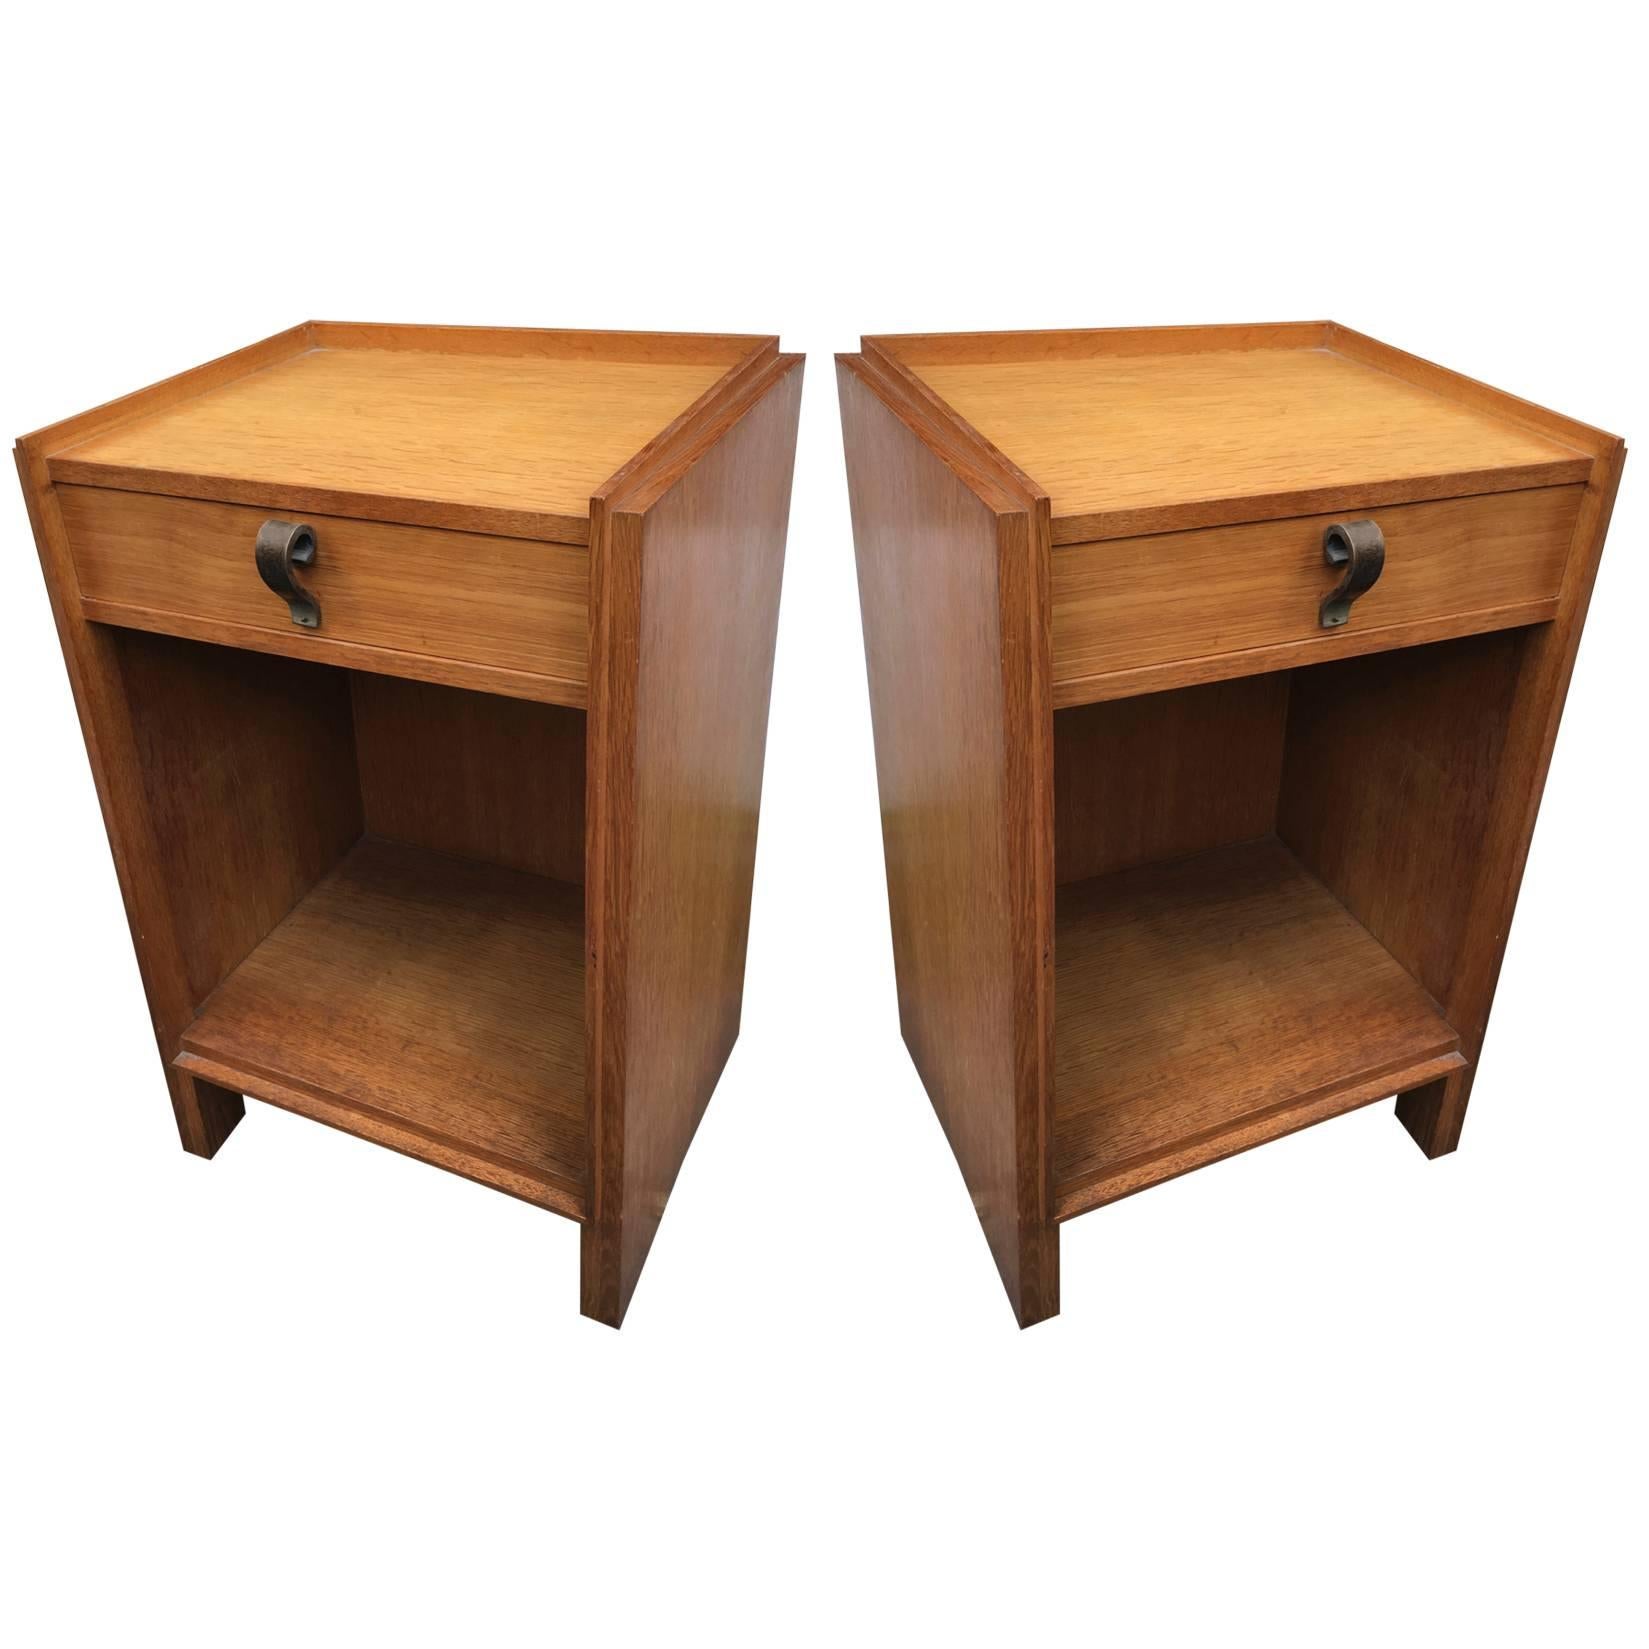 Maxime Old Pair of Oak Bedsides with Pure Design and Original Iron Handle